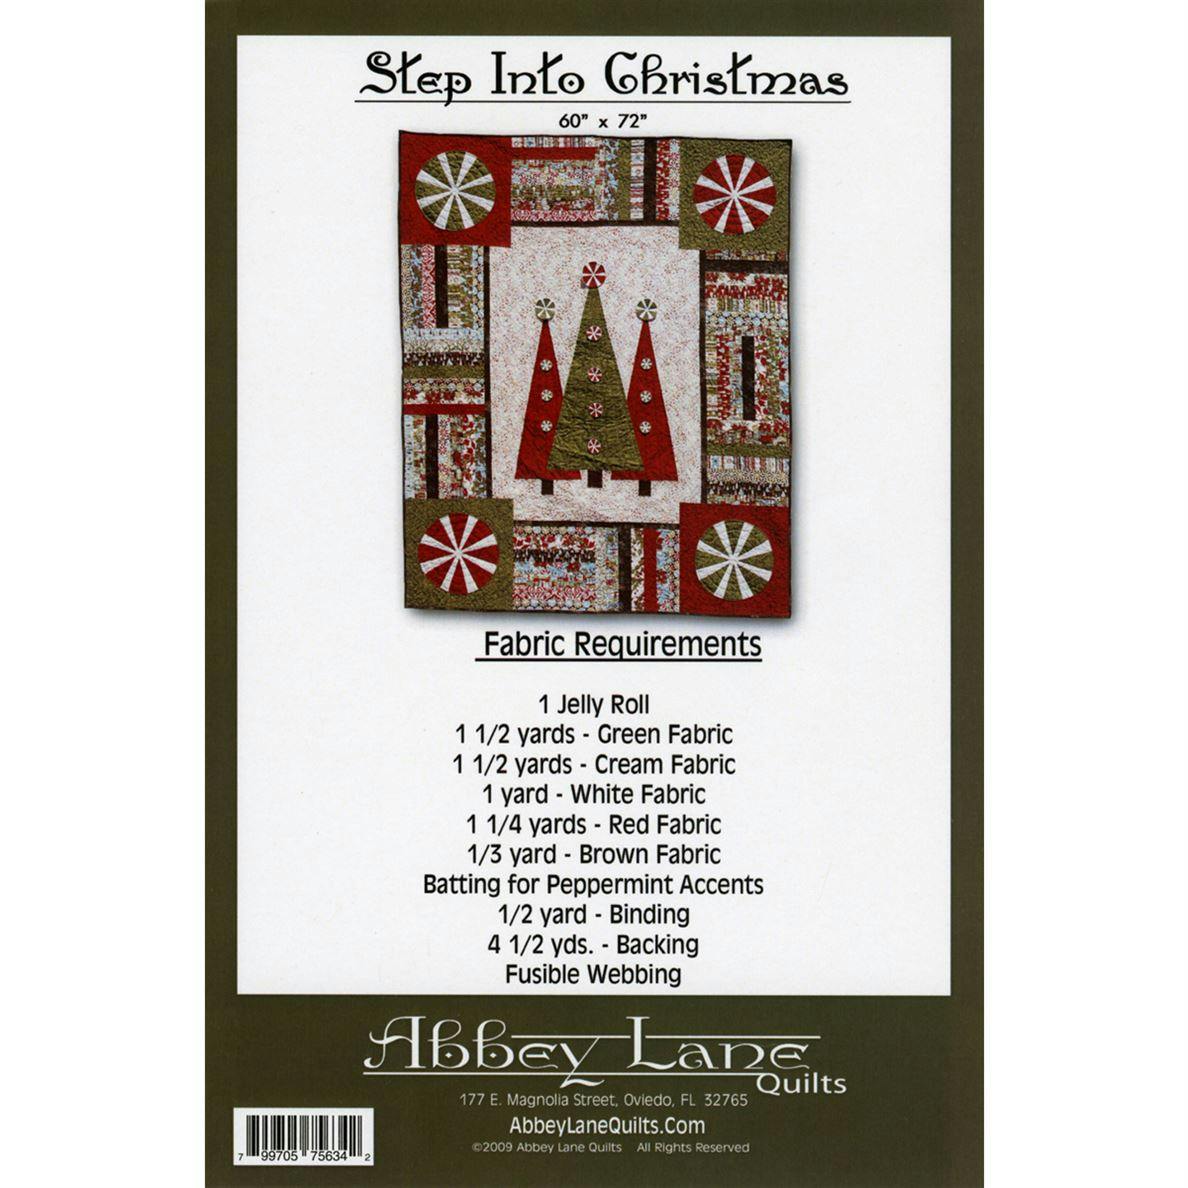 Materials list for Step Into Christmas pattern